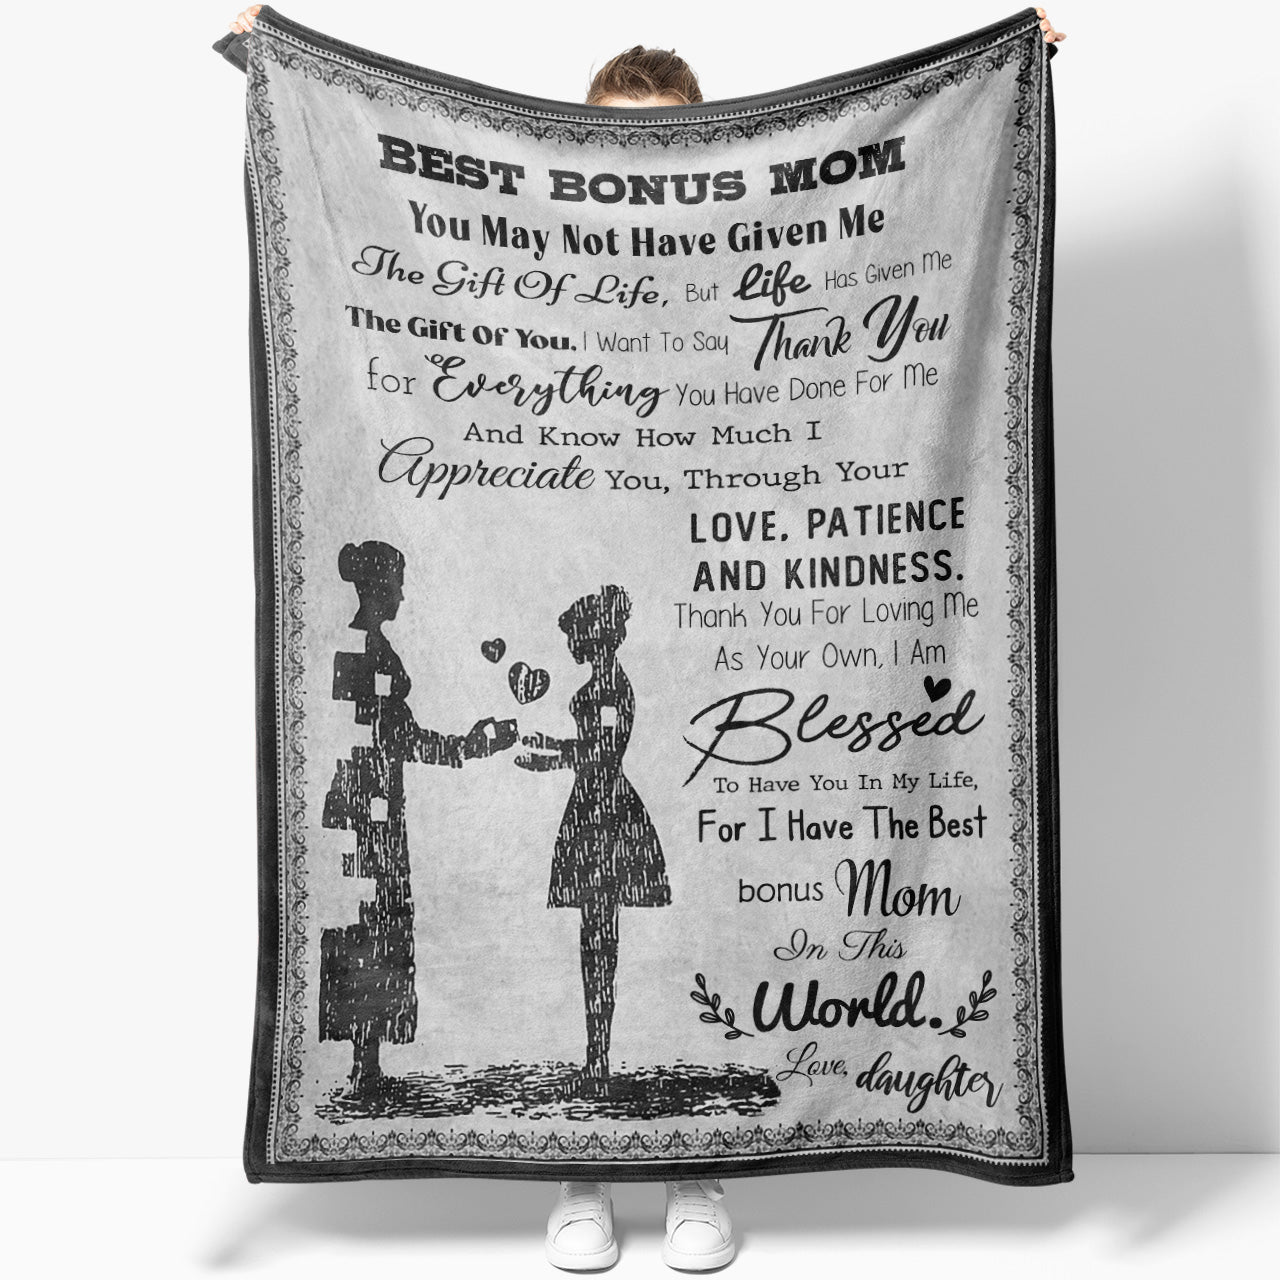 Blanket Gift Ideas For Step Mom, Life Has Given Me The Gift Of You Blanket for Bonus Mom Mothers Day